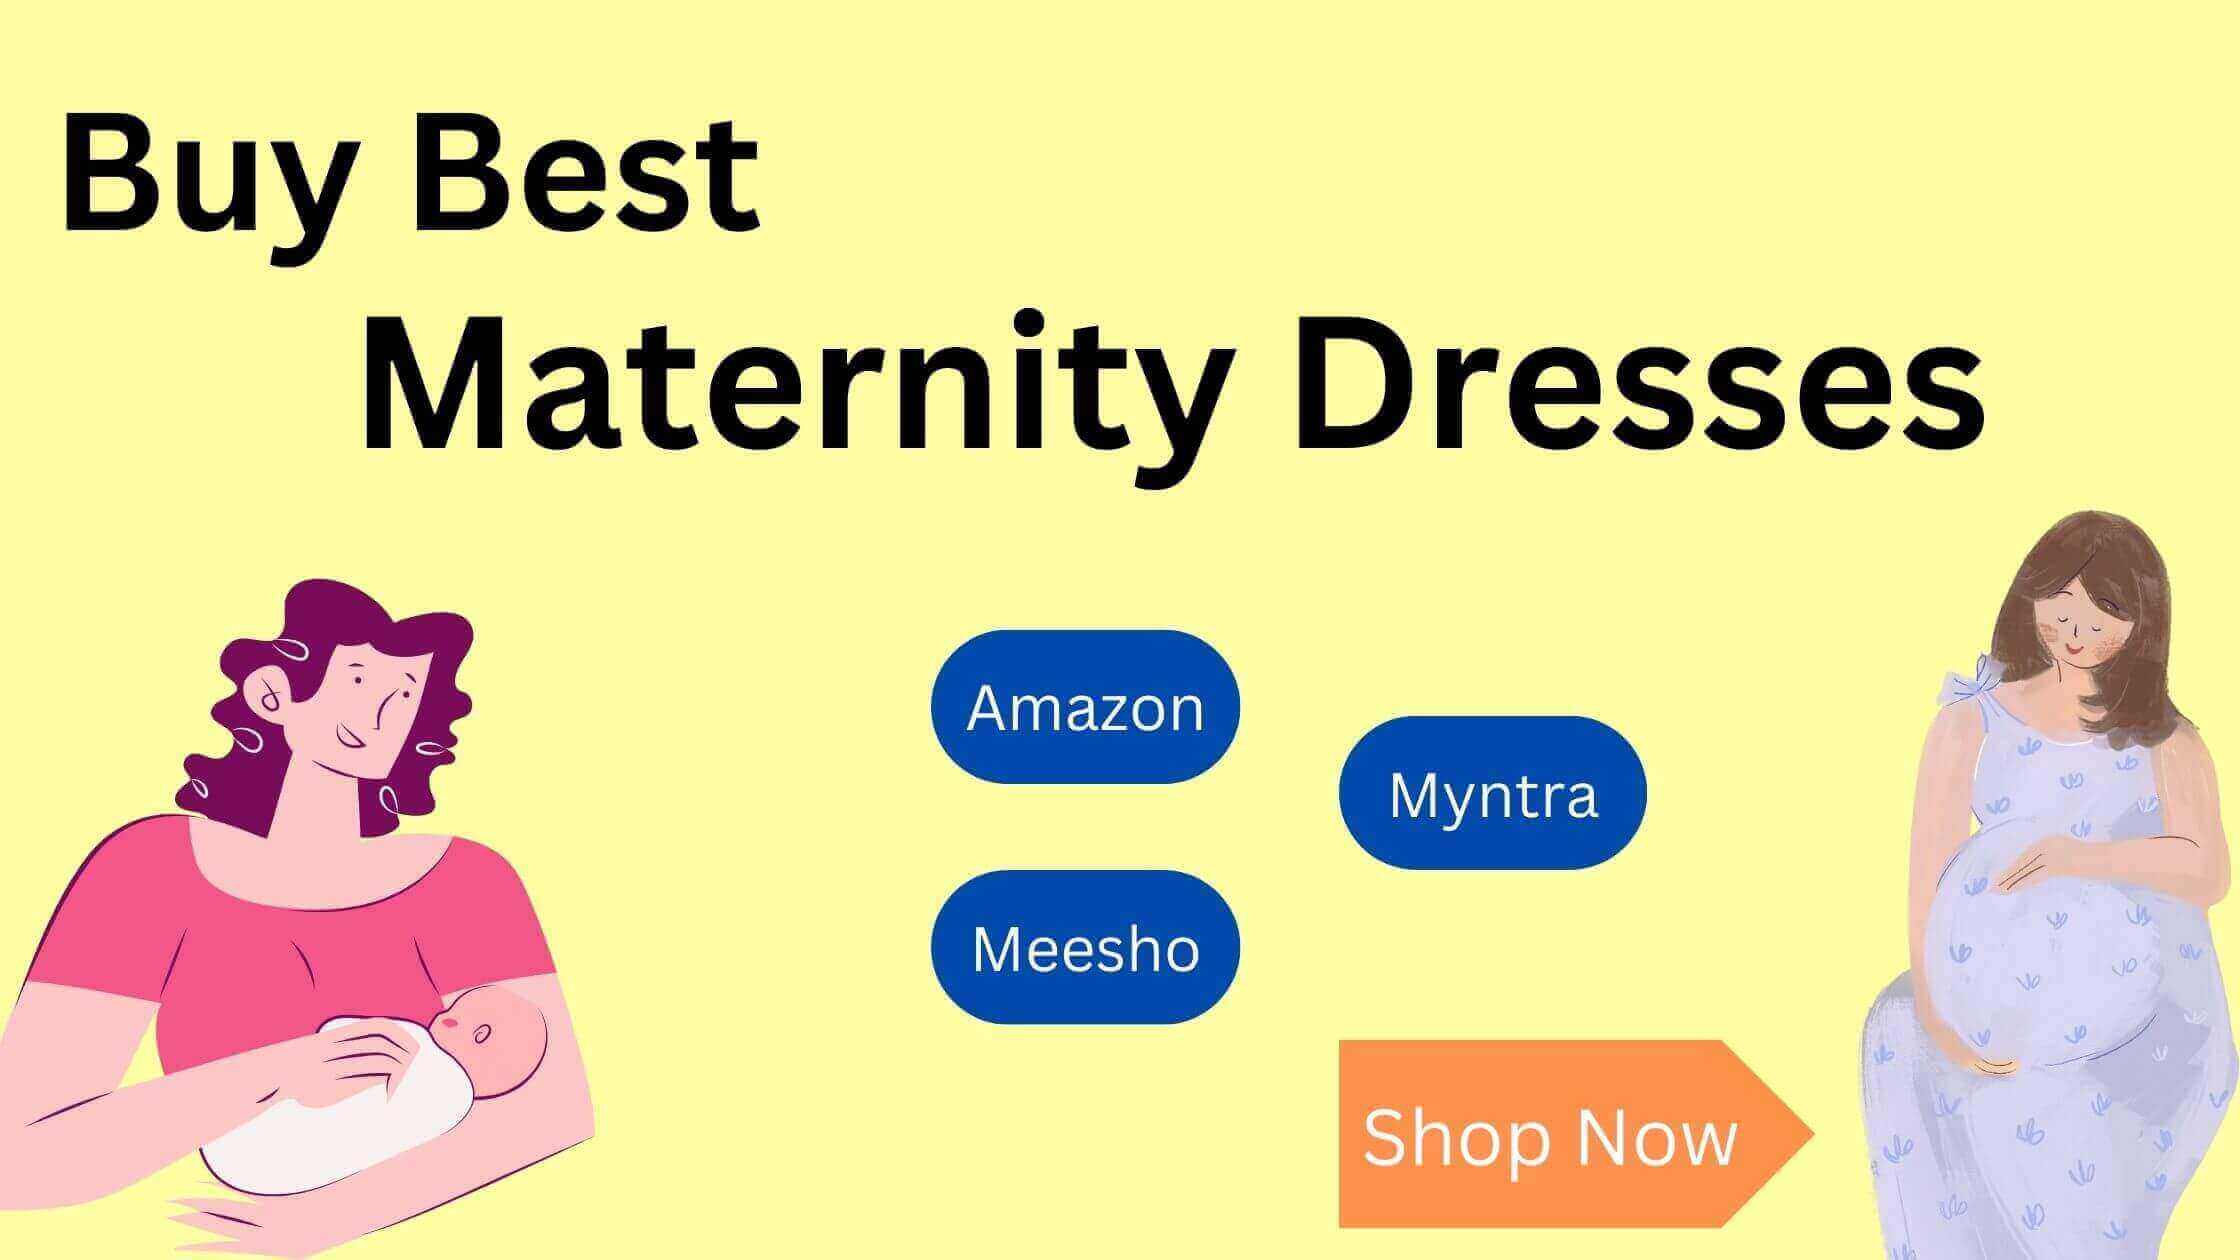 Buy Best Maternity Dresses and Accessories